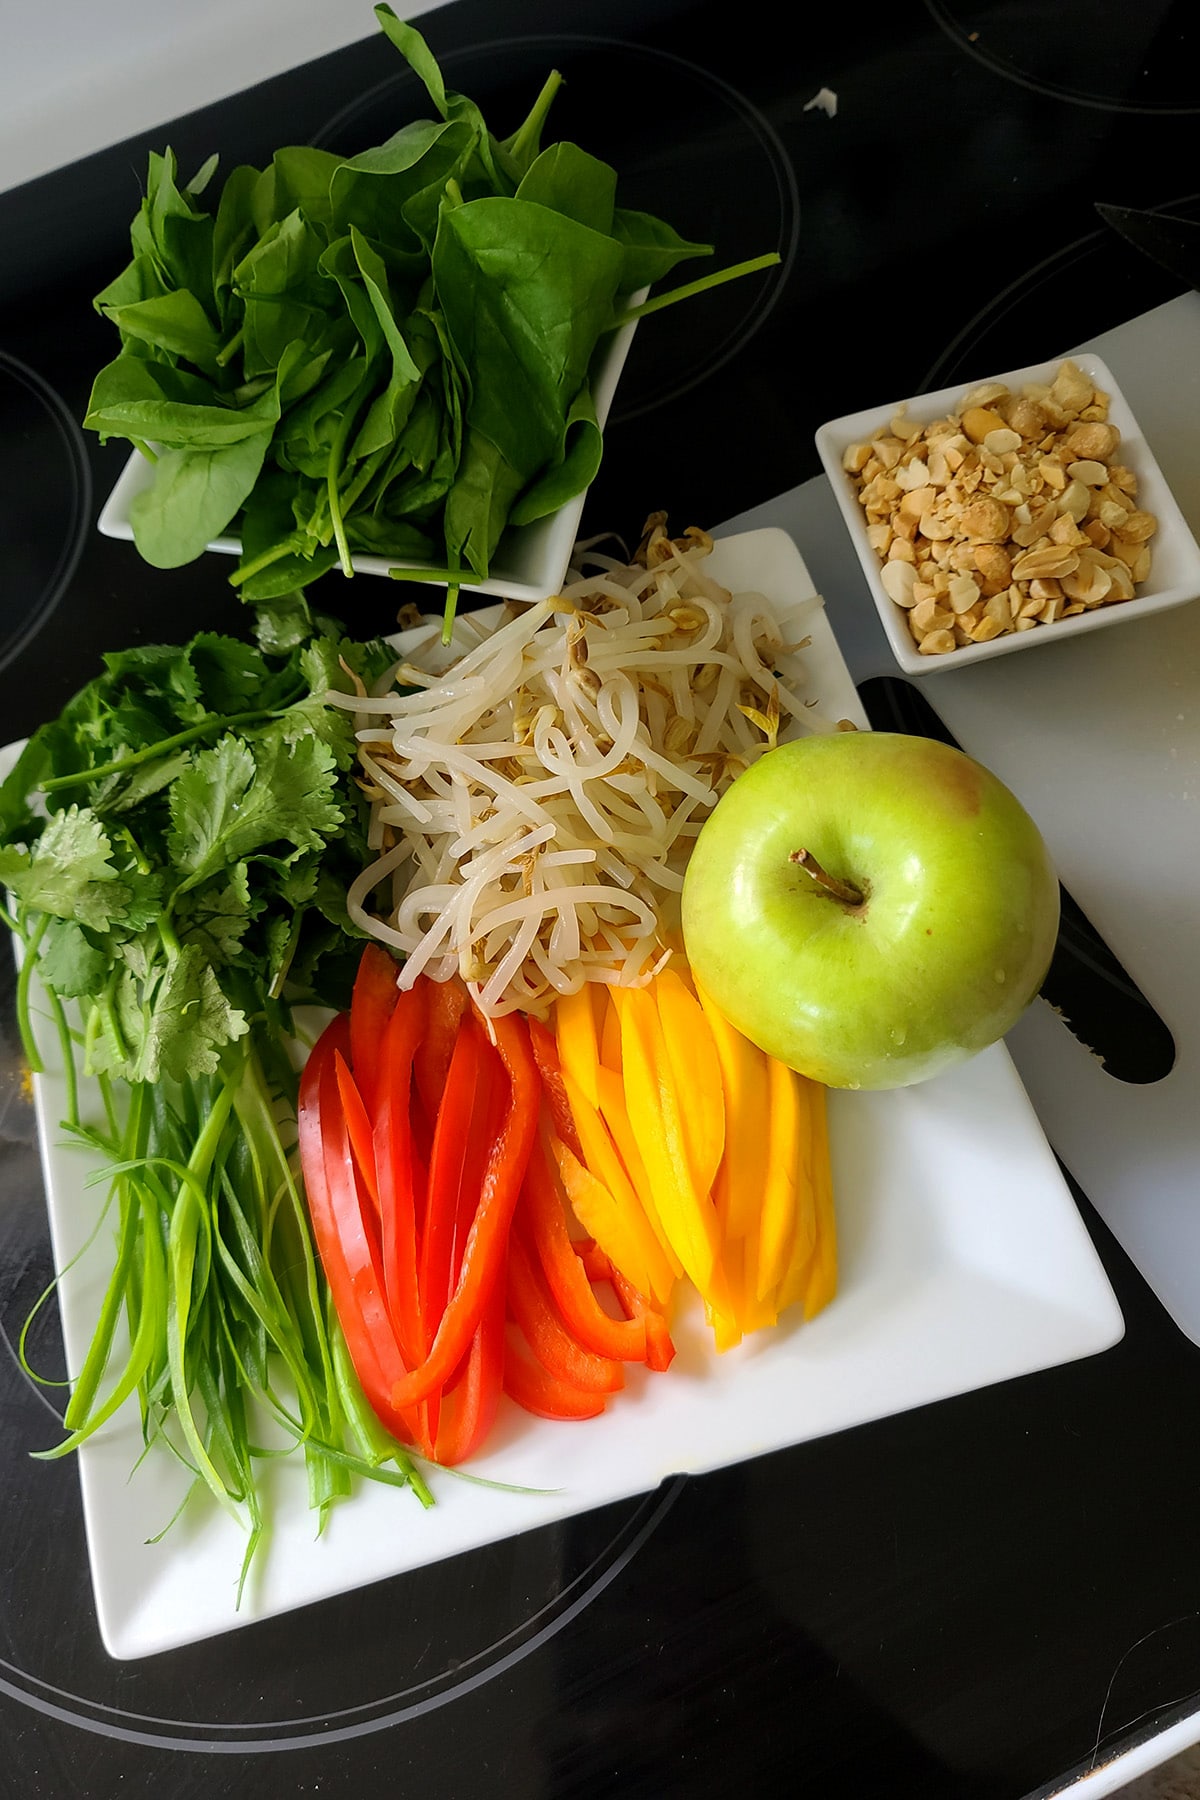 A plate with a green apple and slices of mango, red pepper, and green onions, along with bean sprouts, mint, peanuts, and spinach.